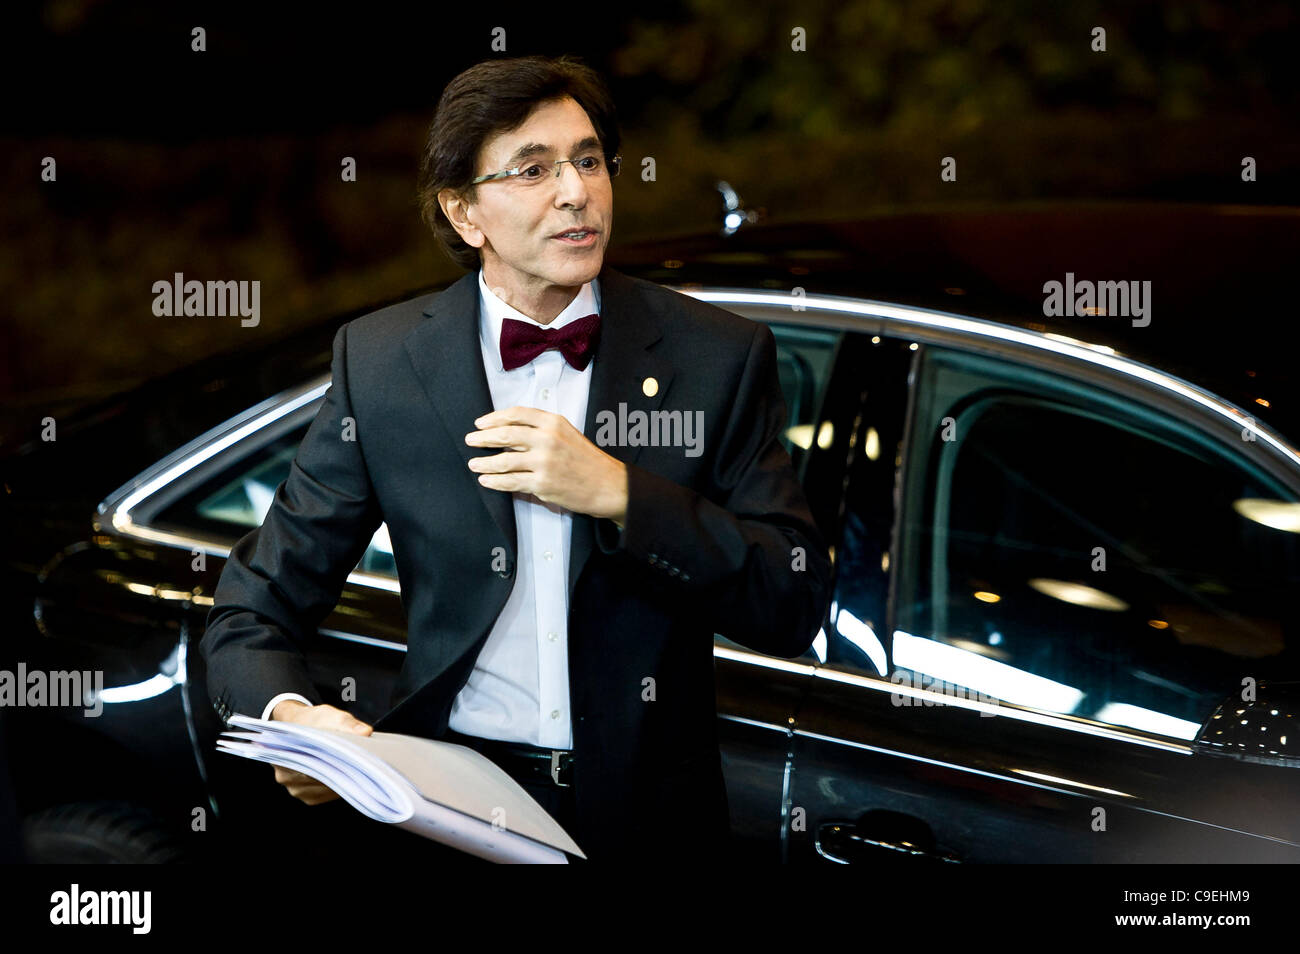 Dec. 8, 2011 - Brussels, BXL, Belgium -  Belgian Prime minister Elio Di Rupo arrives for the European Summit  in  Brussels, Belgium on 2011-12-08  EU leaders gathered to rescue the Eurozone from the crisis. European Commission President Jose Manuel Barroso called on EU leaders meeting on 08 December Stock Photo